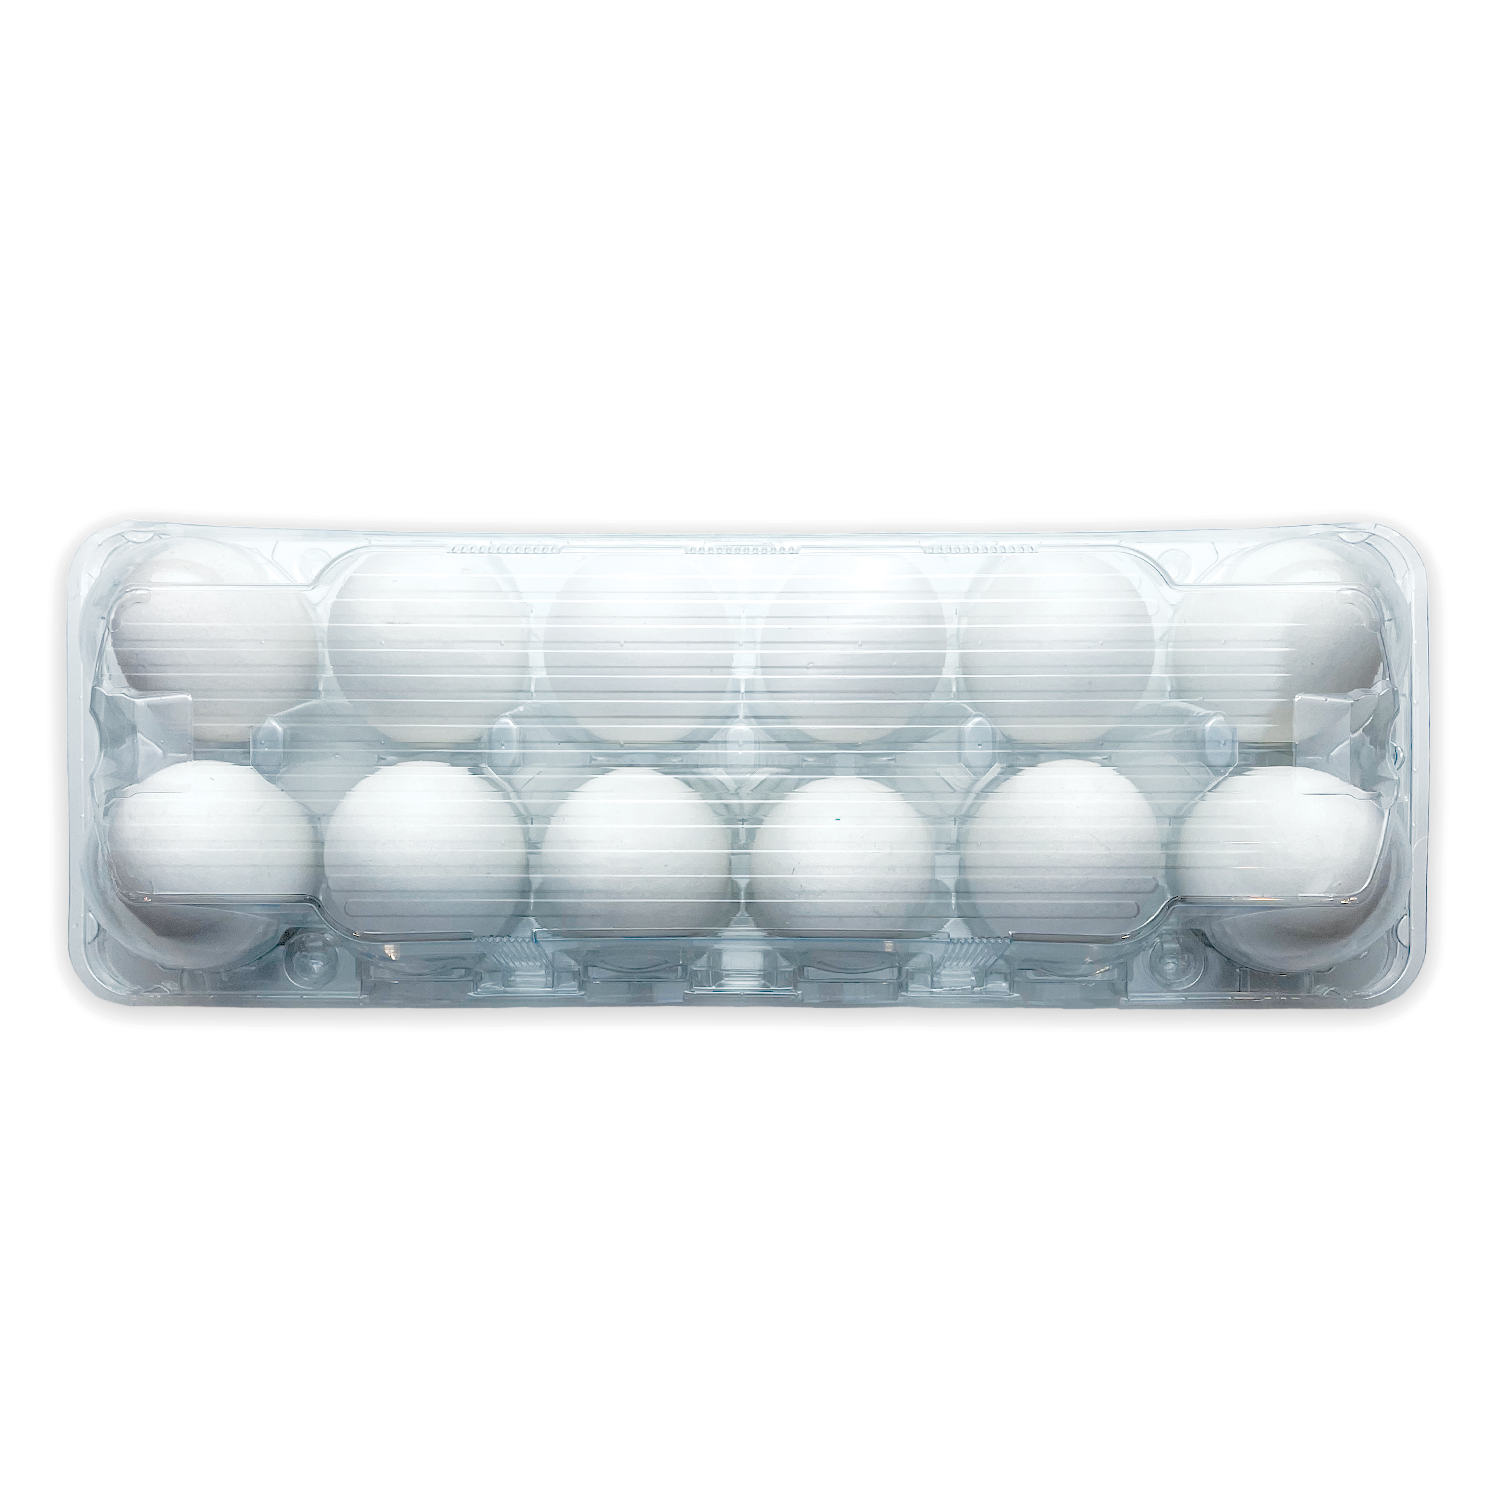 48-Pack Plastic Egg Cartons, Holds 1 Dozen with Date Labels